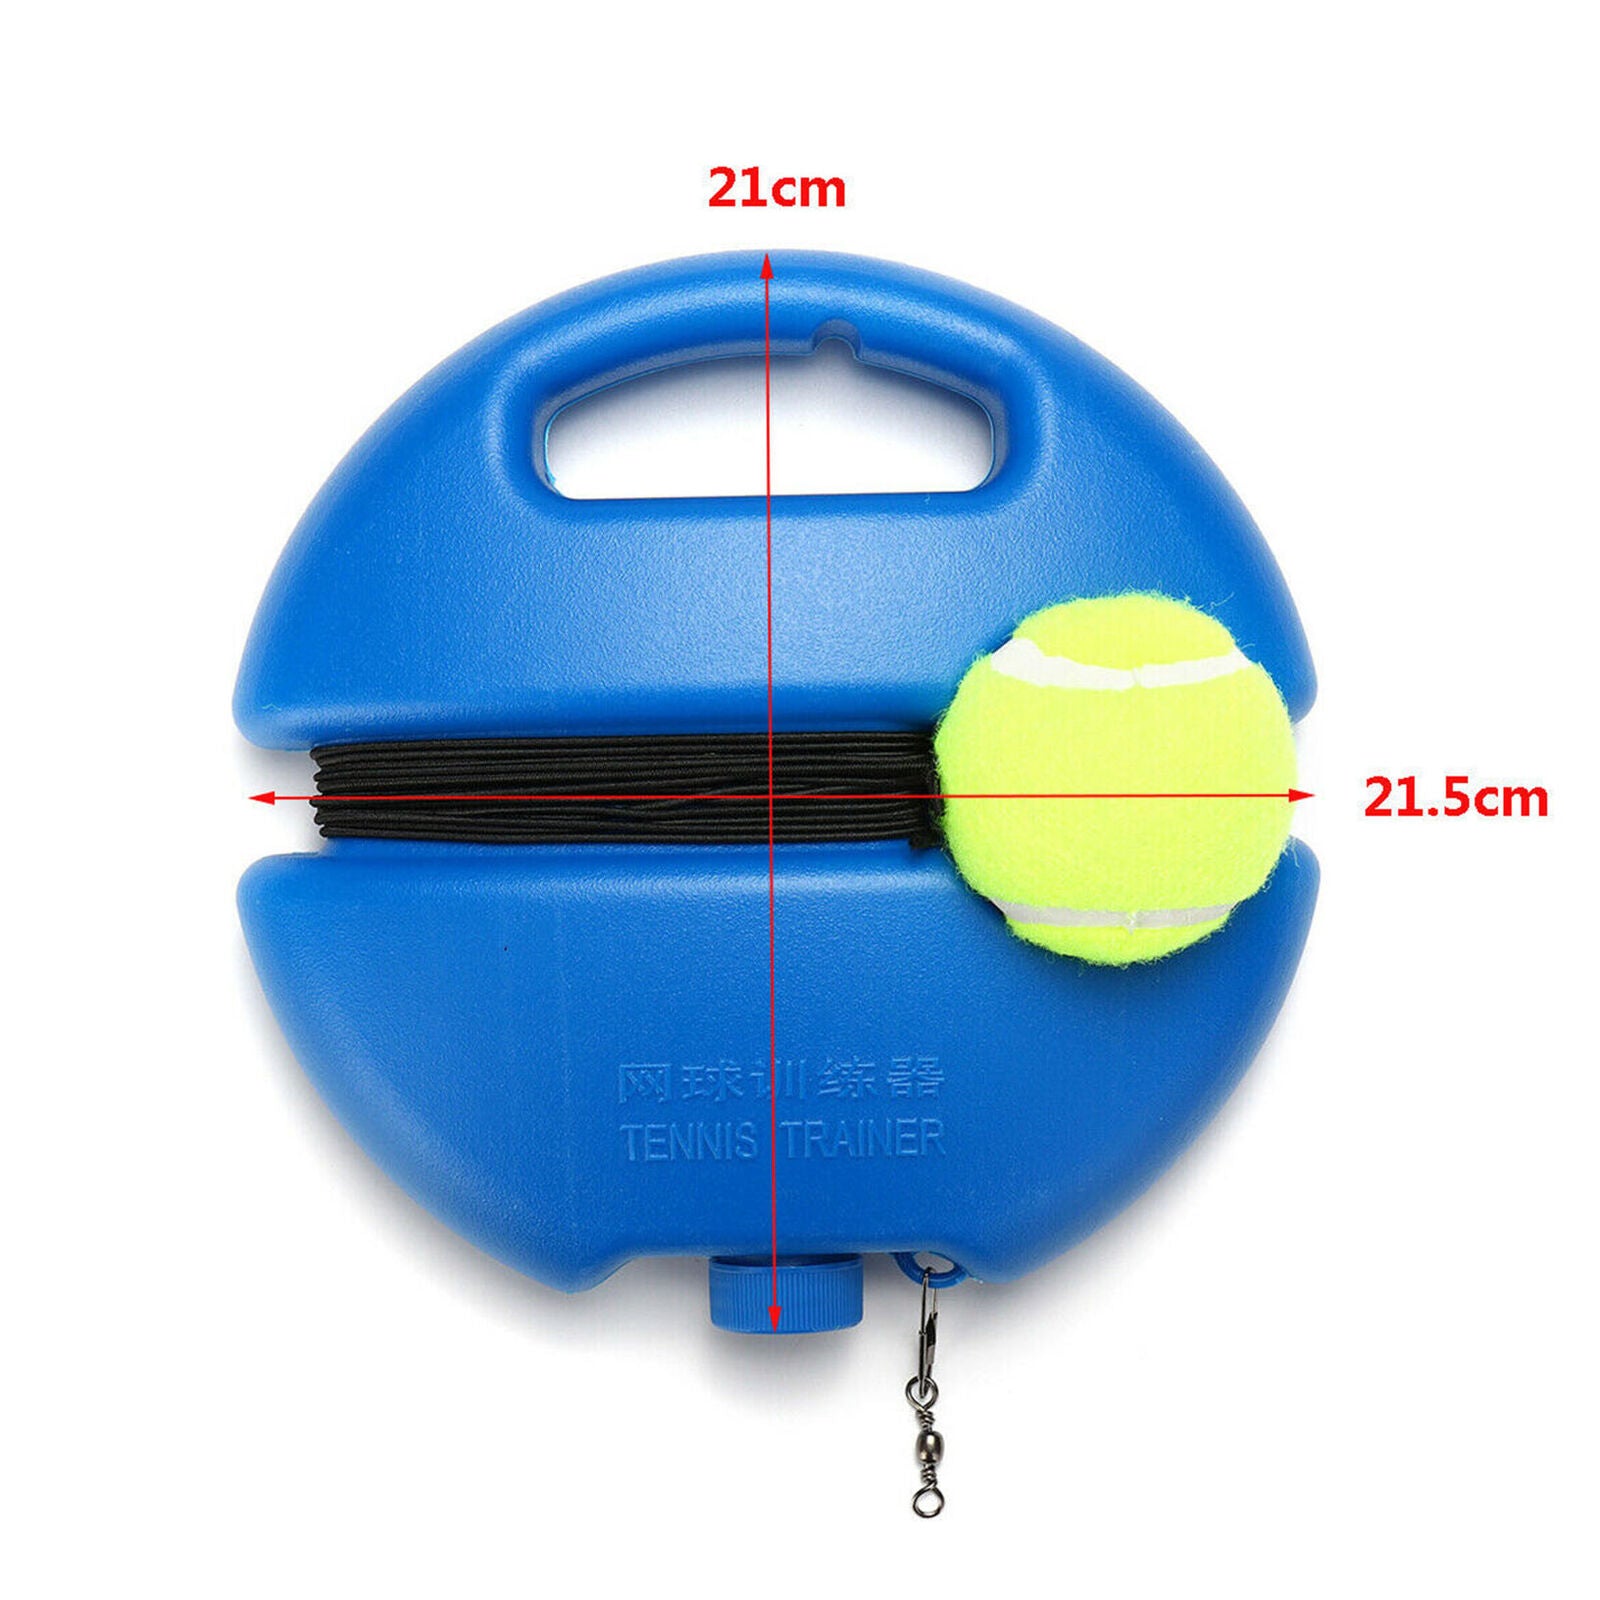 Singles Tennis Training Practice Ball Baseboard Base Trainer + String Tennis new